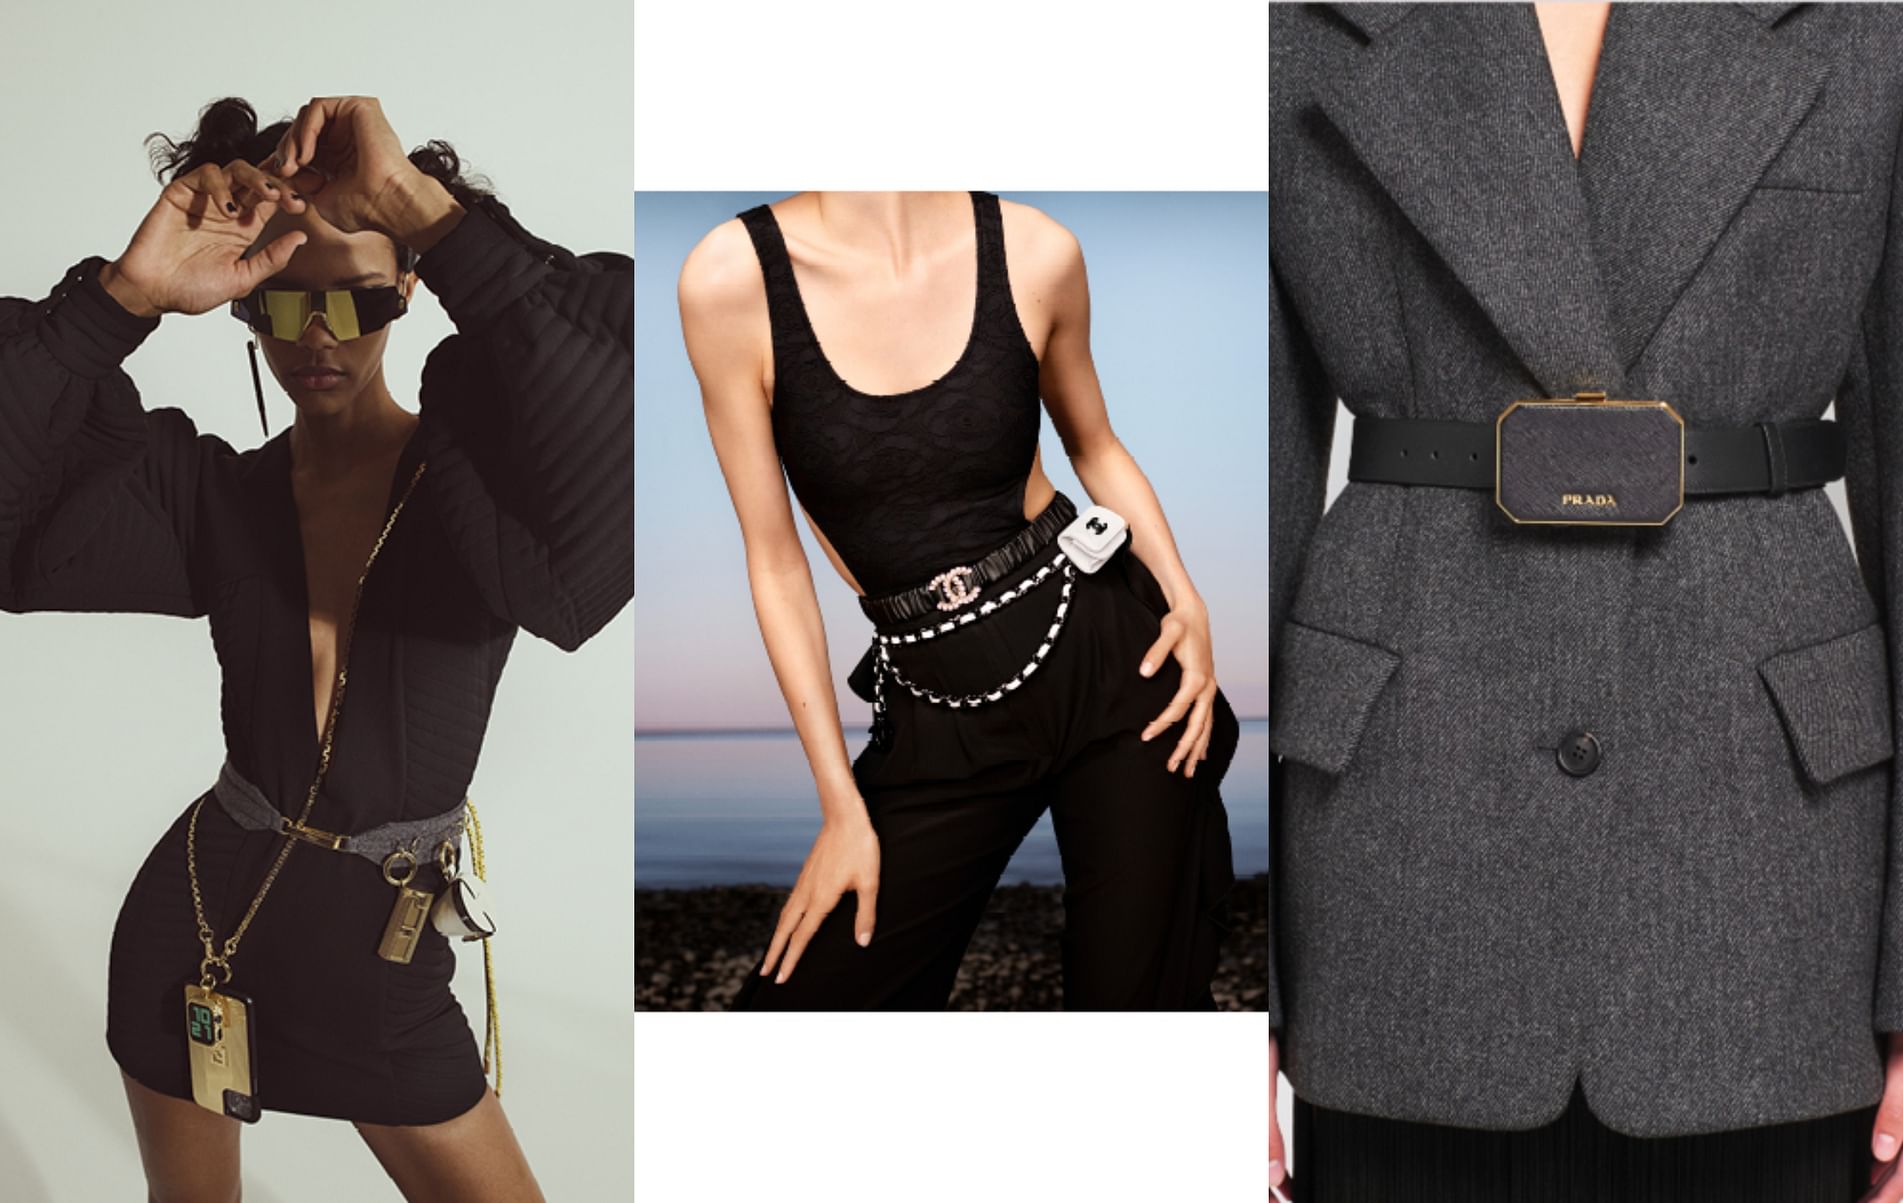 Hot trend: The best designer belt bags to invest in - ICON Singapore